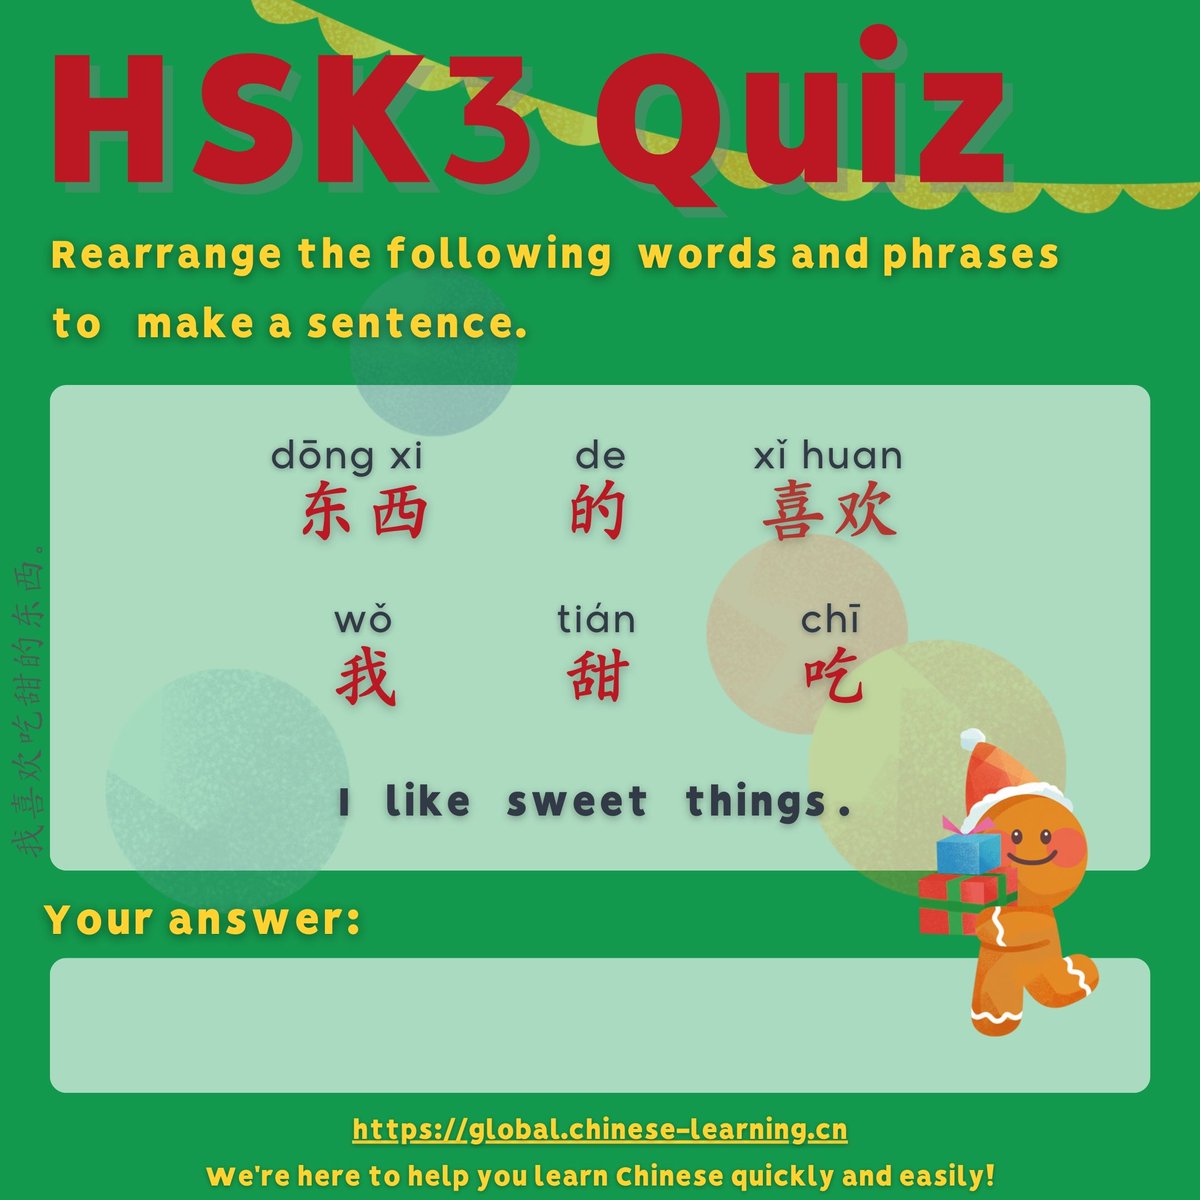 HSK3 Quiz Rearrange the following words and phrases to make a sentence #HSK #hsktest #Chinese #学中文 #Chineselearning #学汉语 #studytwt #learnchinese #汉语 #mandarin